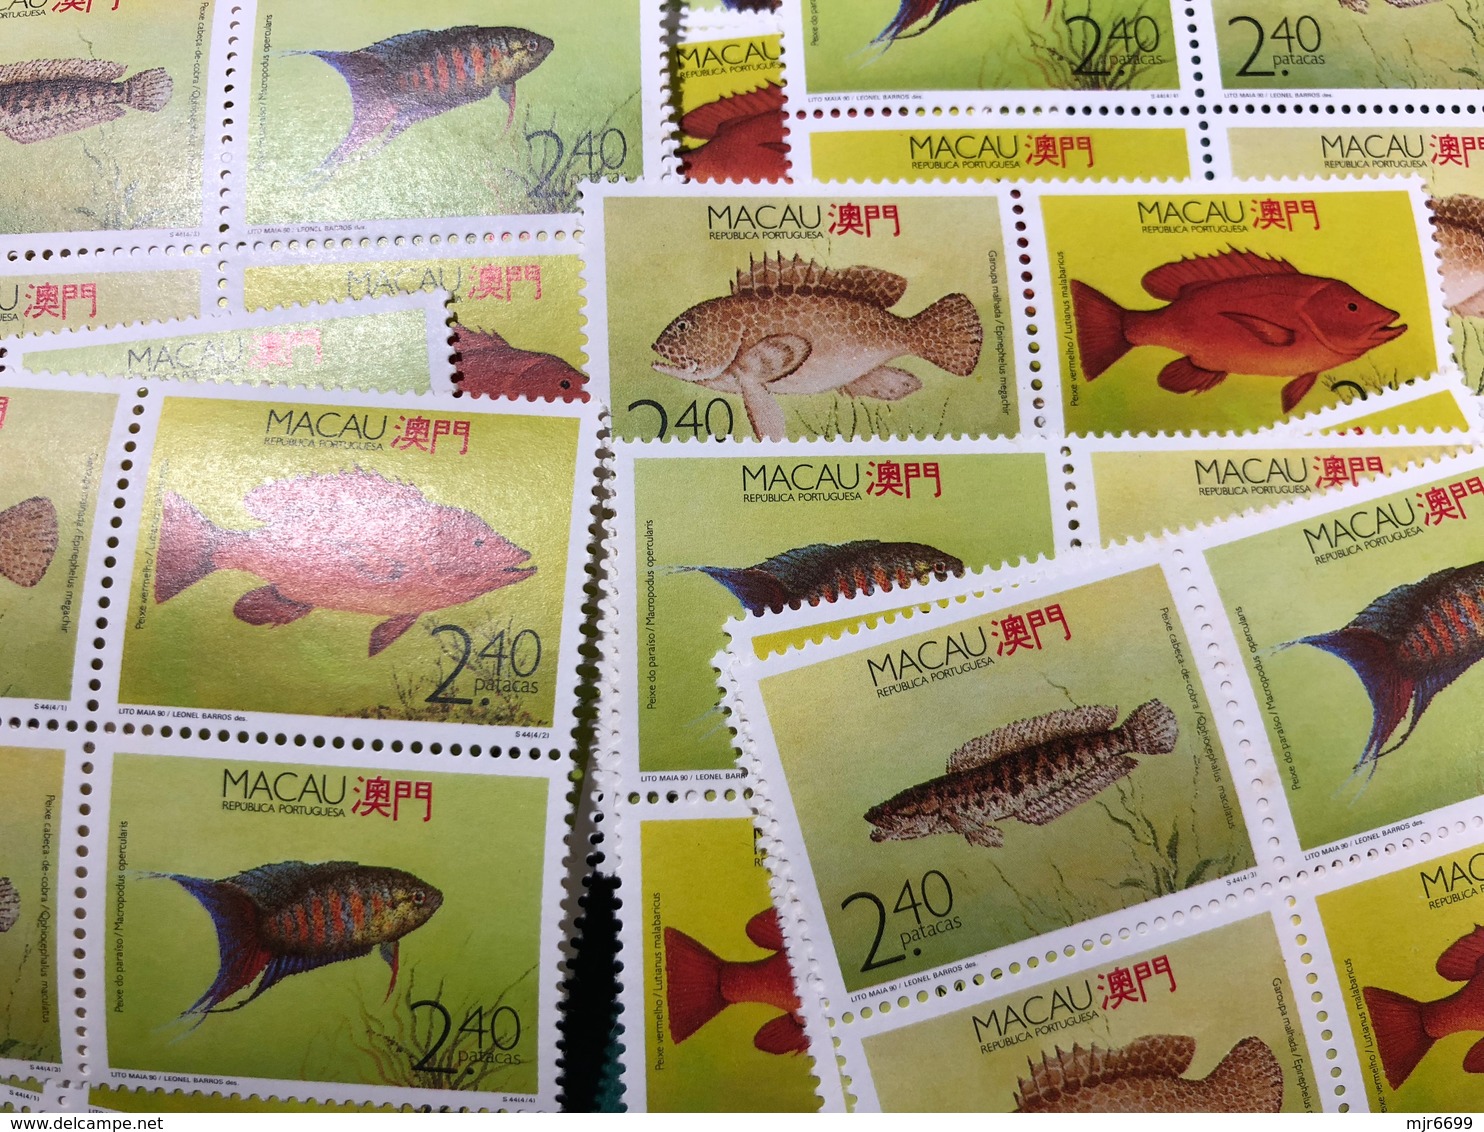 MACAU 1990 - FISHES  - 1 SET IN BLOCK OF 4, UM VF - Collections, Lots & Séries